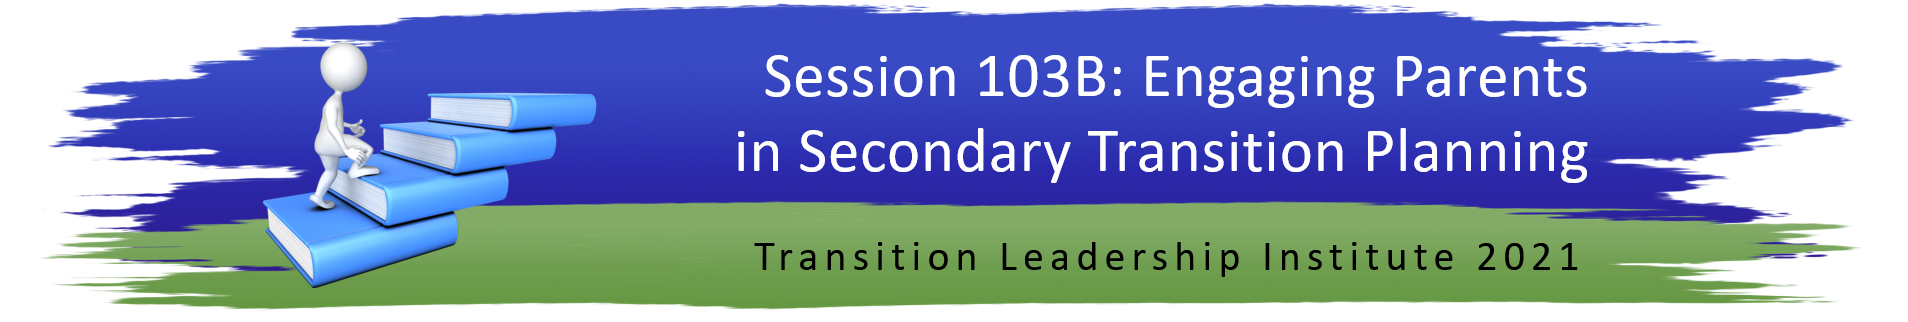 Session 103B: Engaging Parents in Secondary Transition Planning